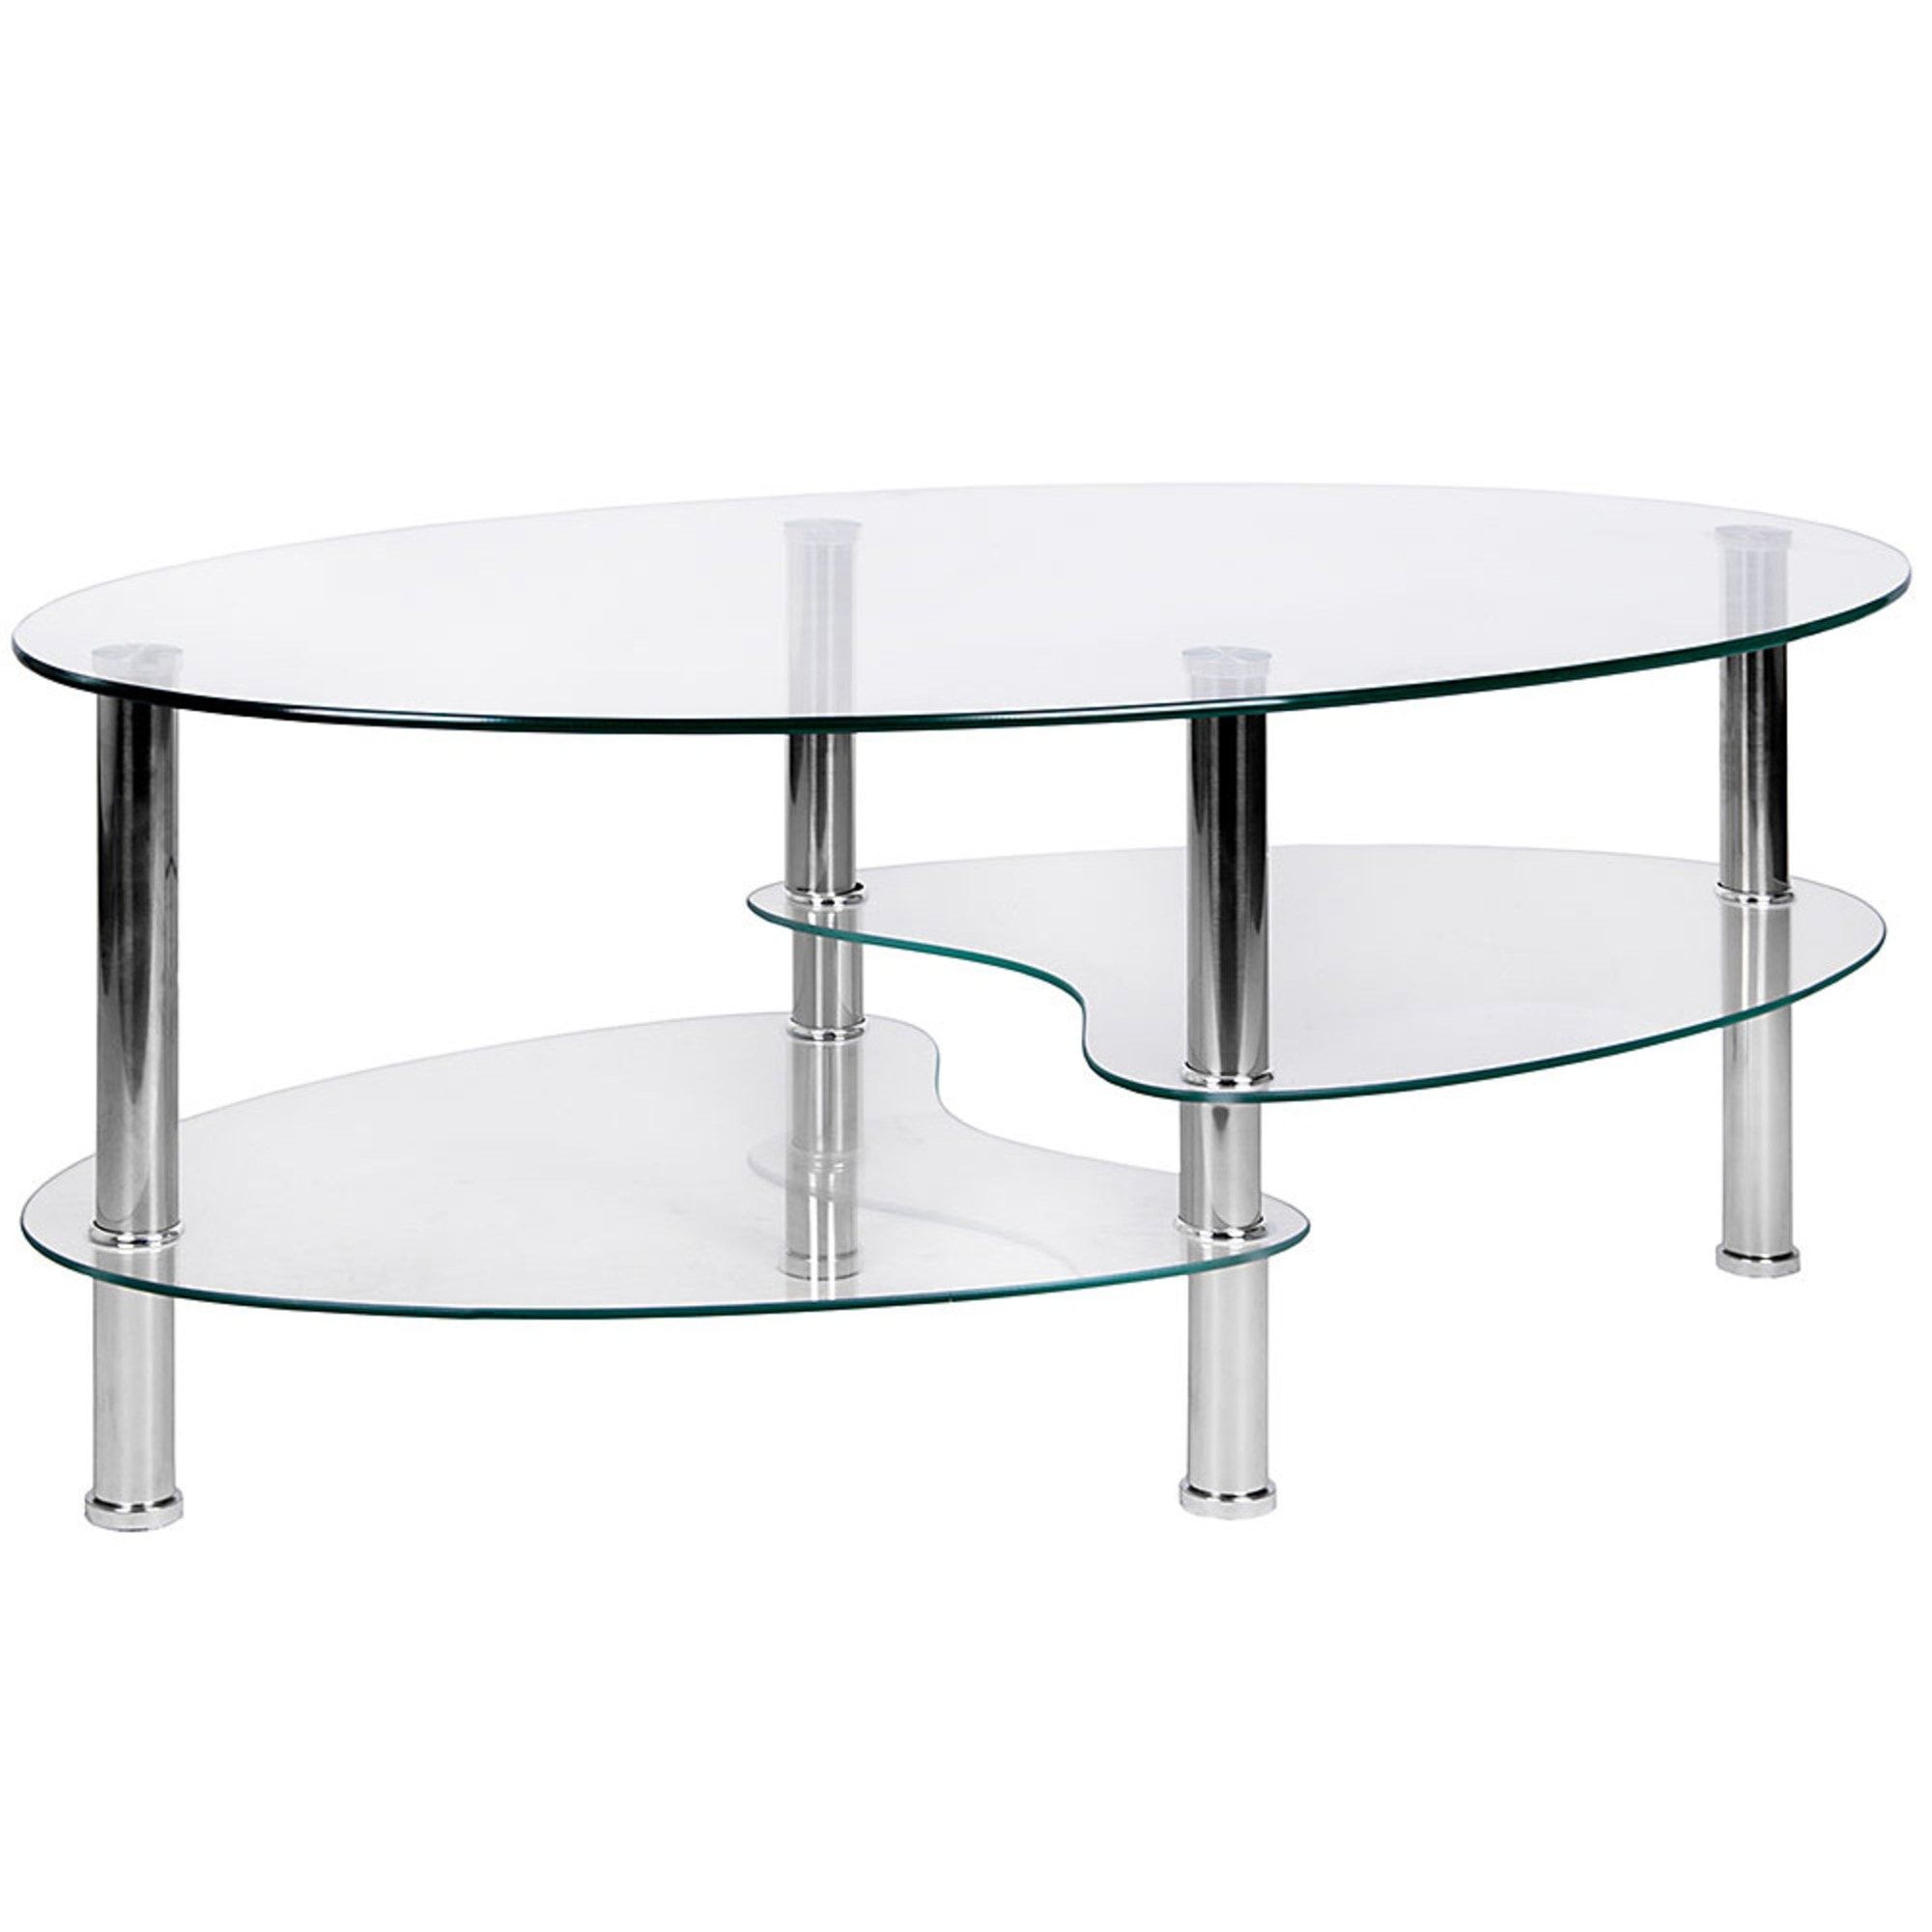 Cara Oval Clear Glass Coffee Table | Dining | Glass Furniture Regarding Oval Glass Coffee Tables (View 2 of 15)